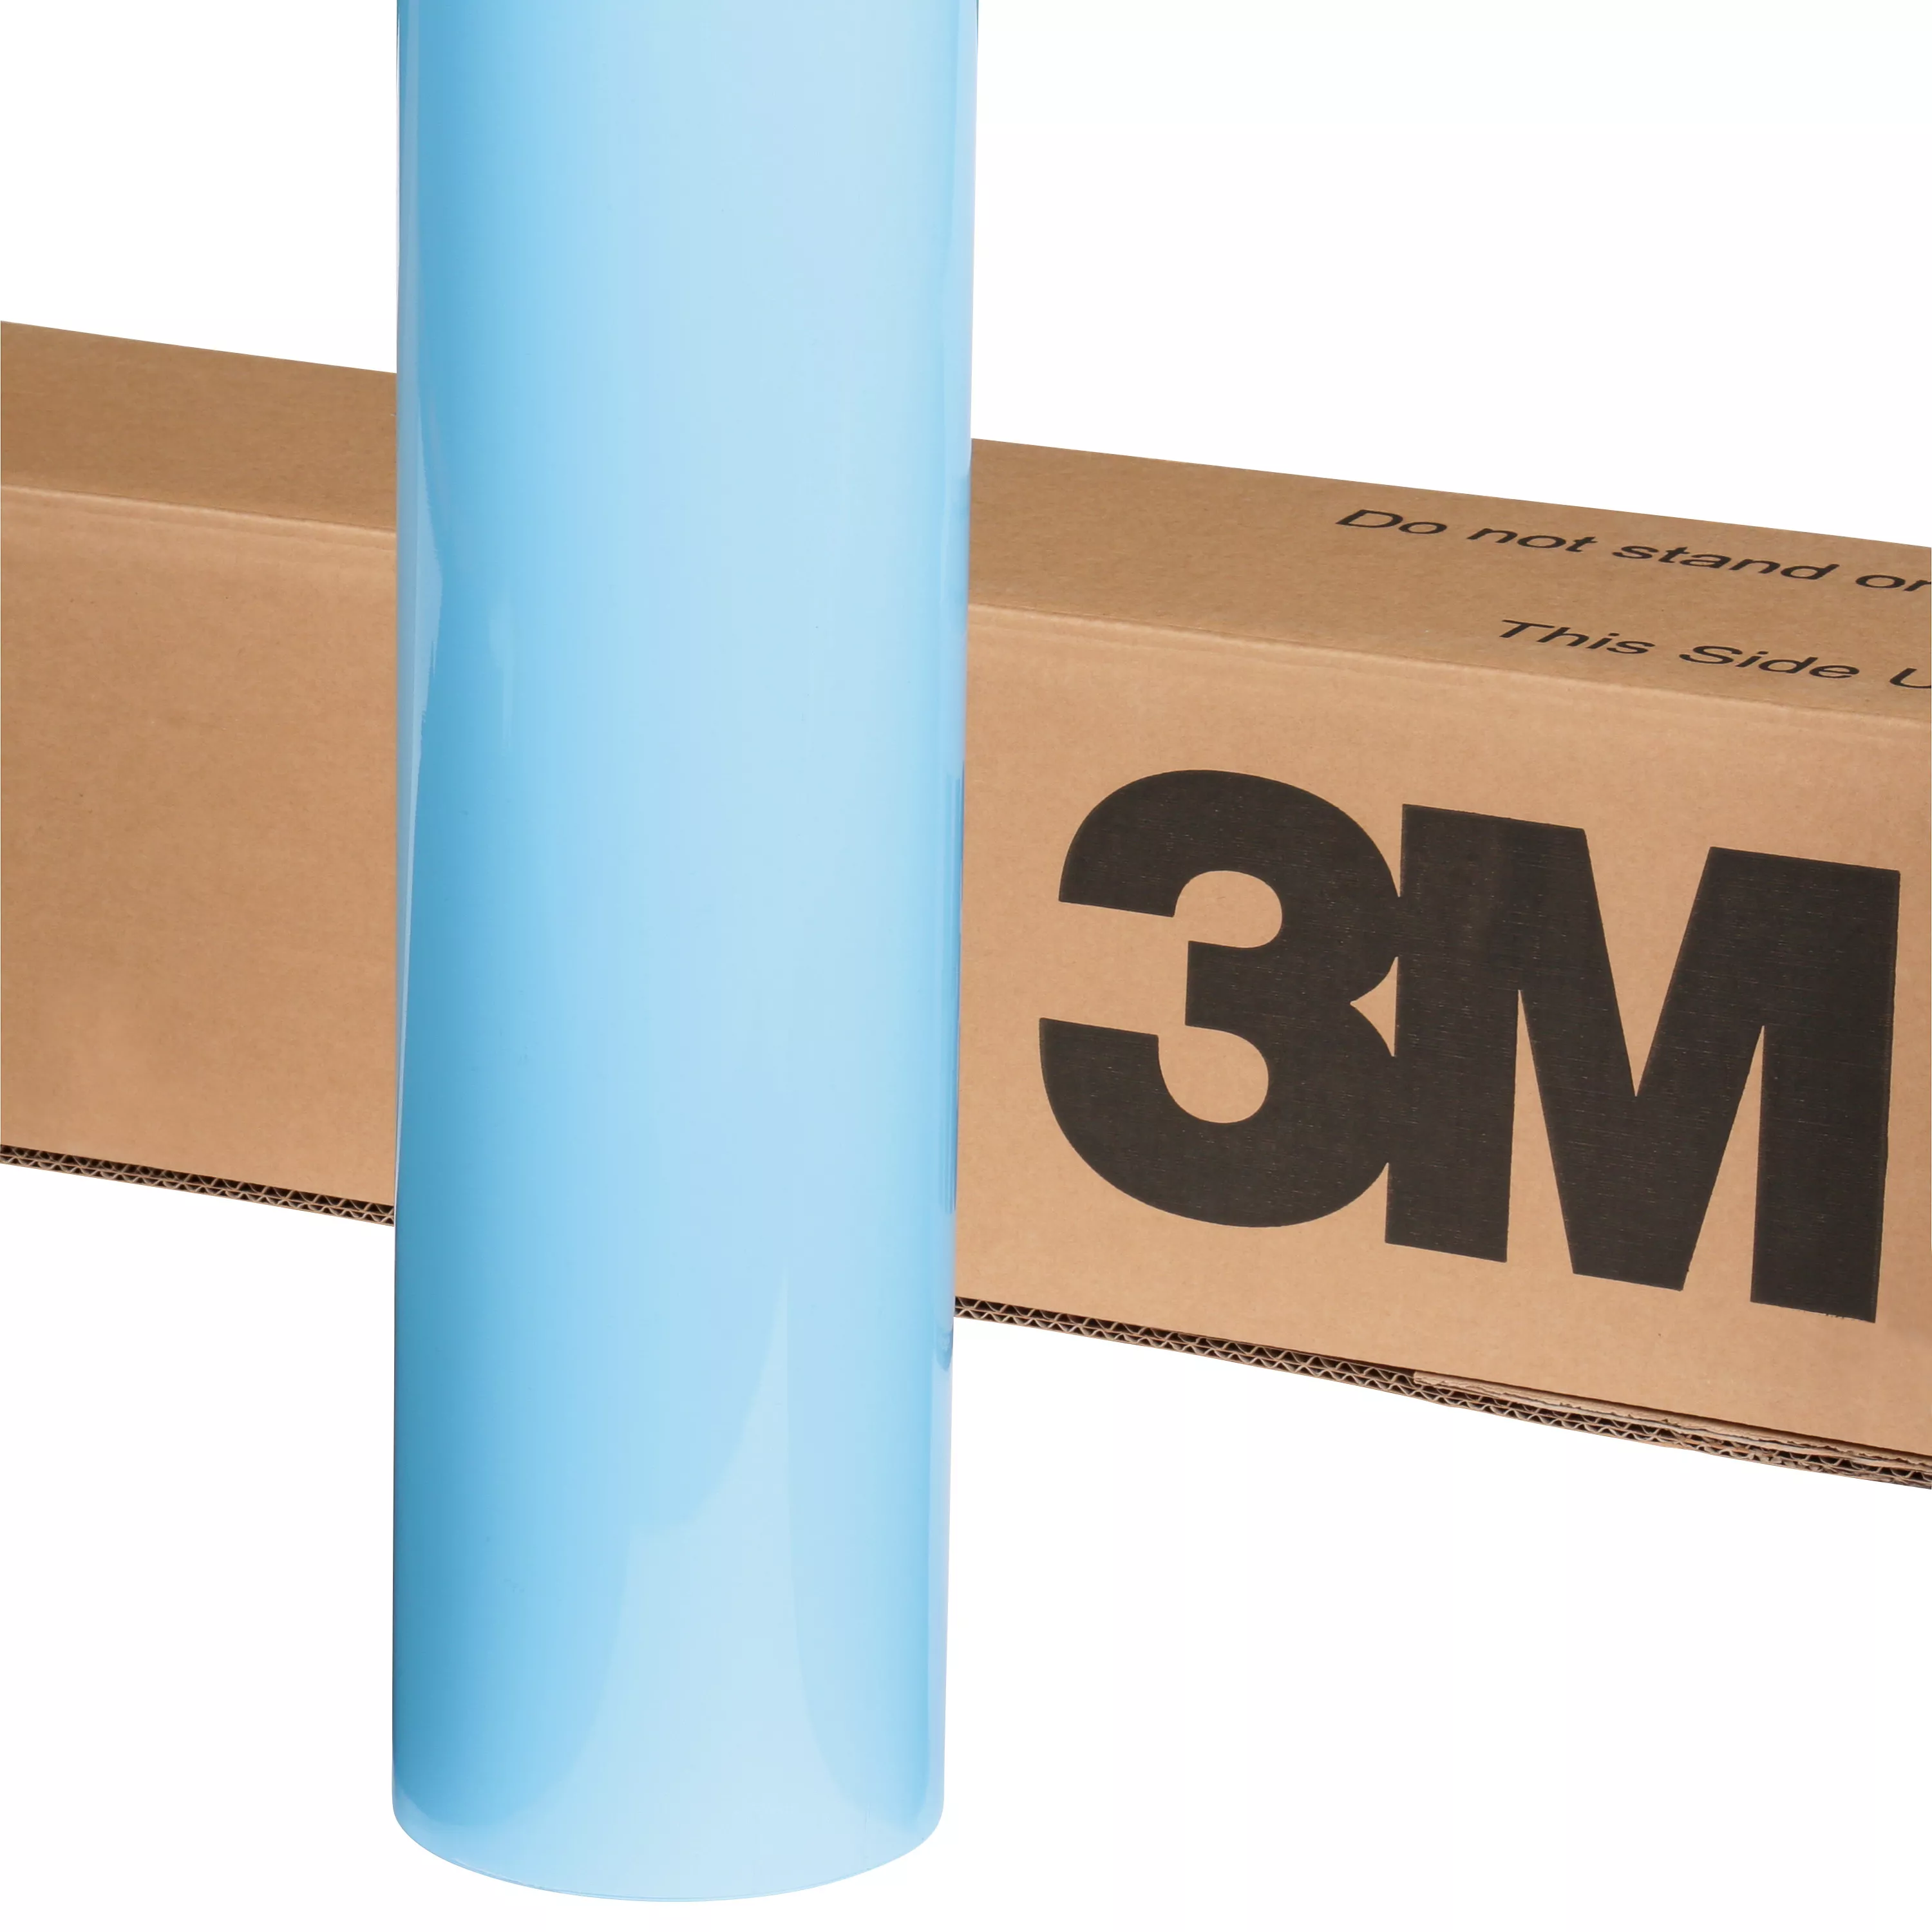 Product Number 2080-HG77 | 3M™ Wrap Film 2080-HG77 High Gloss Sky Blue